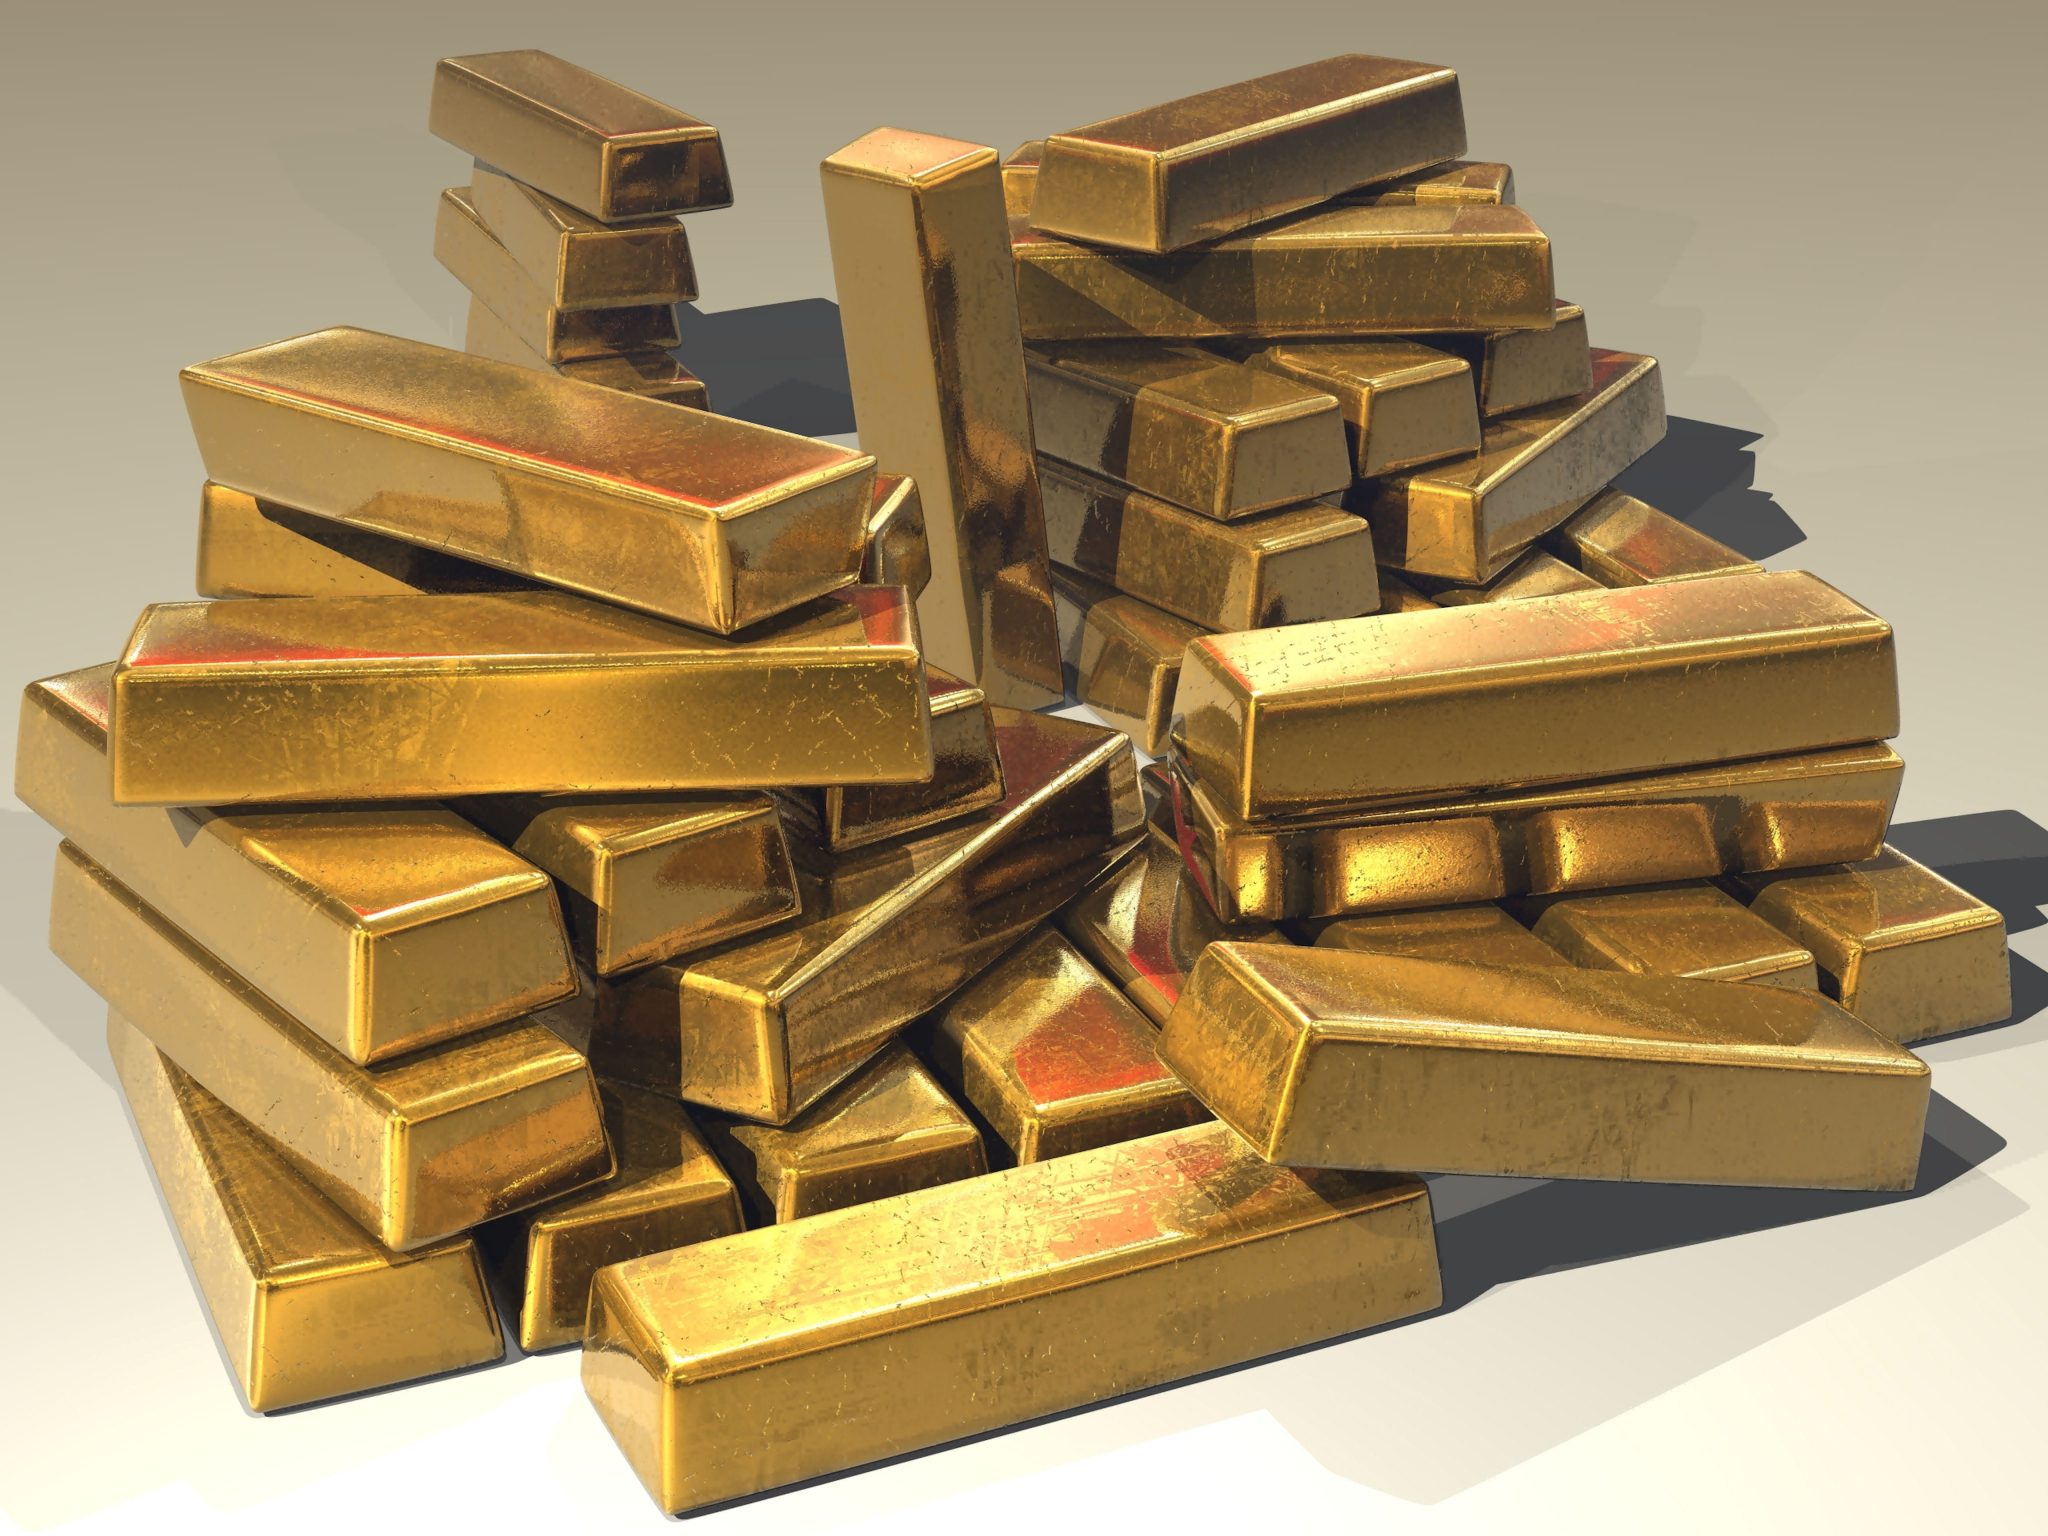 Gold market authority to blacklist conflict producers